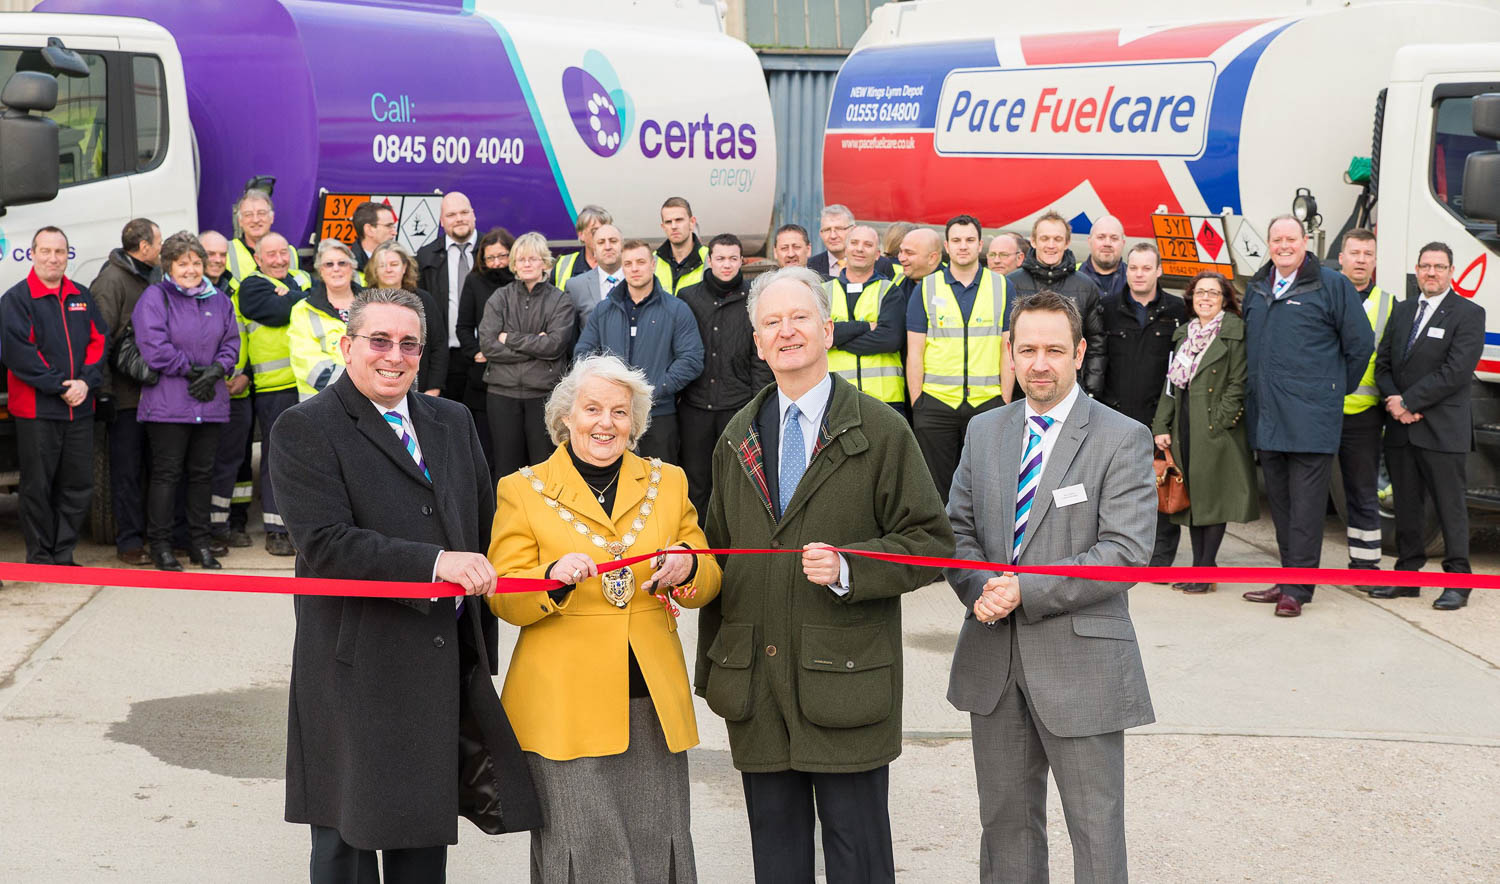 Ribbon cutting of the Pace Fuelcare depot in Kings Lynn